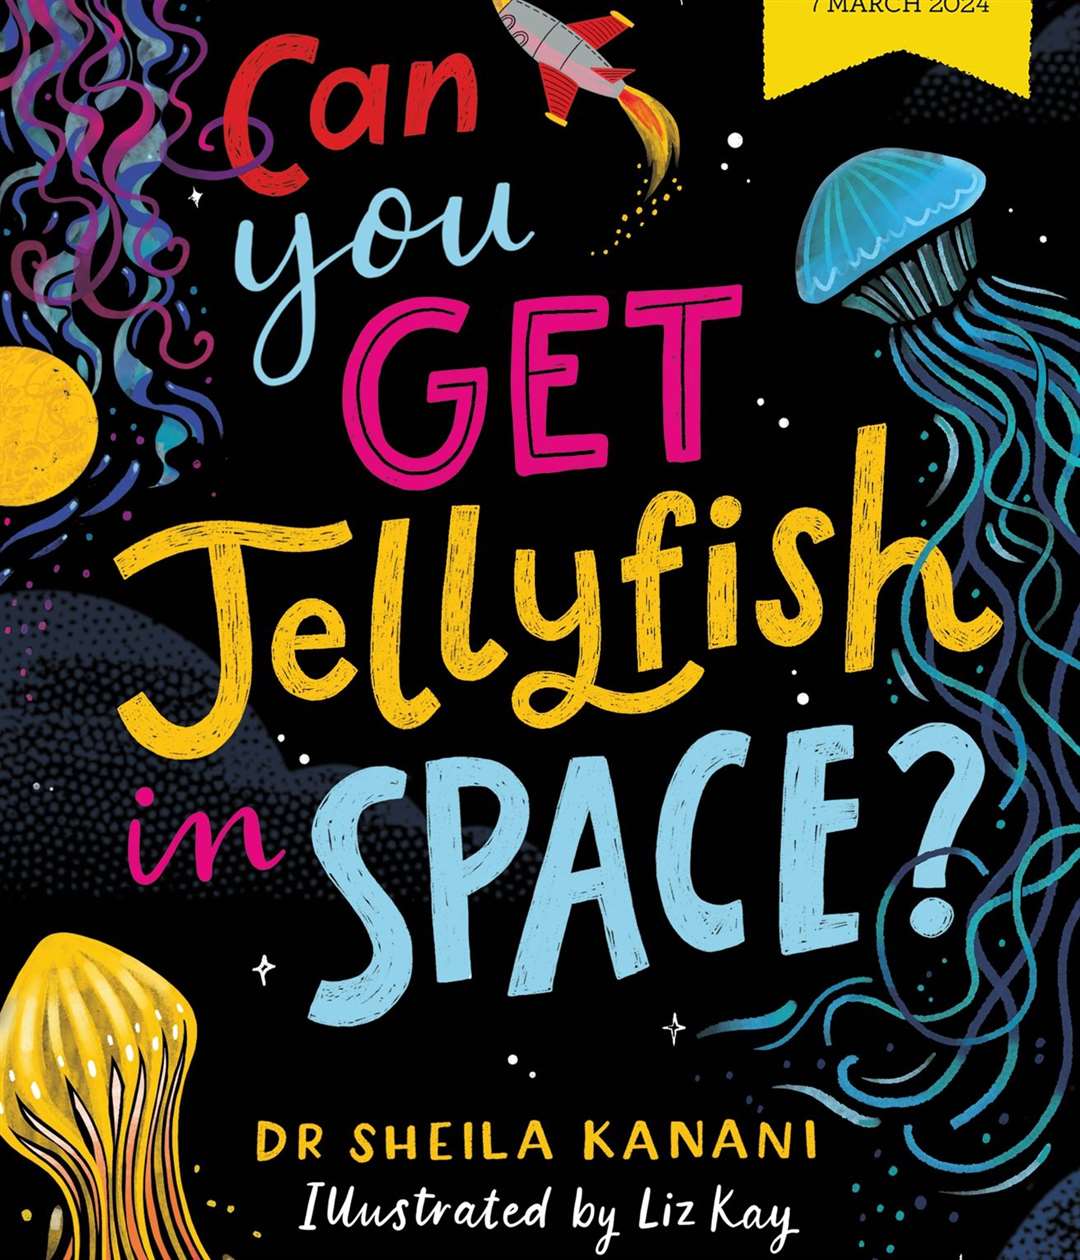 Can you get jellyfish in space will answer many unusual questions